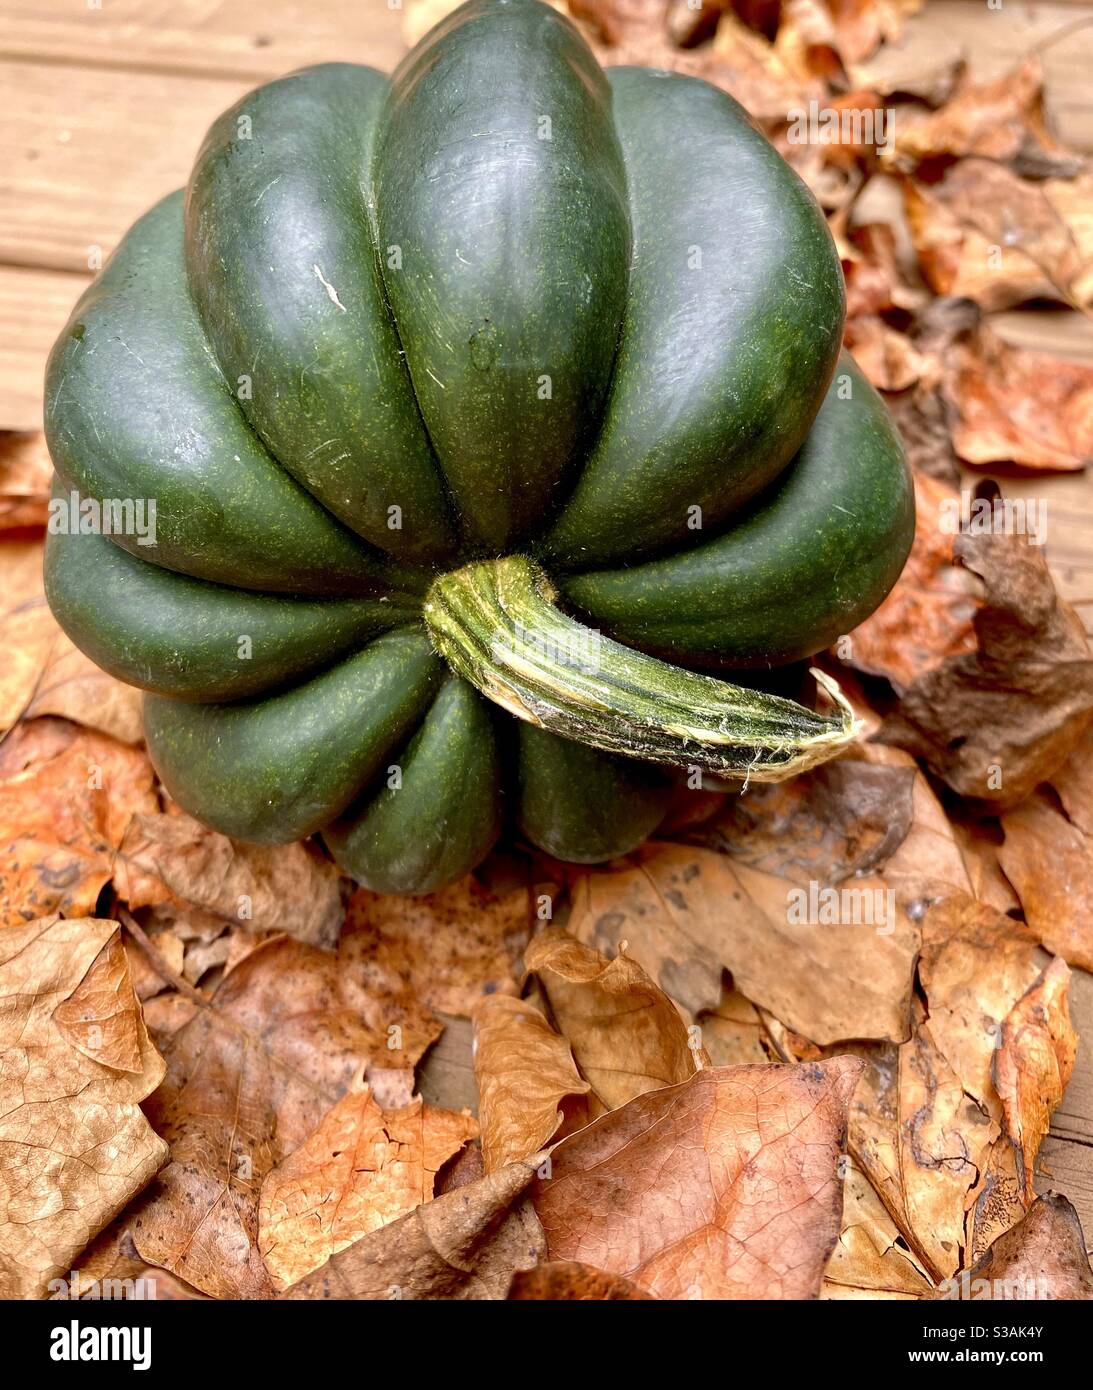 Whole Green acorn squash on top of fallen leaves Stock Photo